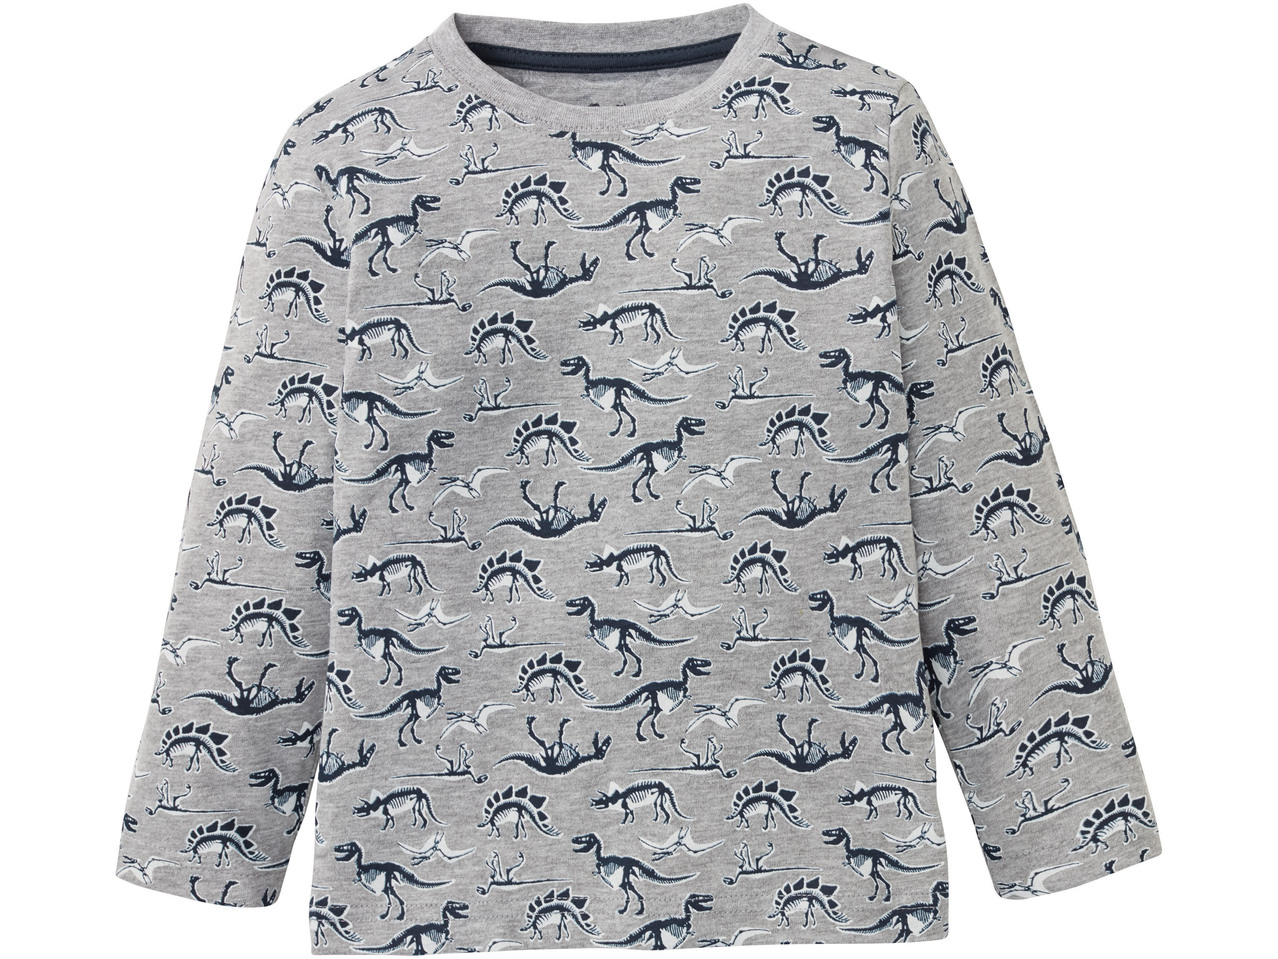 Boys' Long-Sleeved Tops, 2 pieces